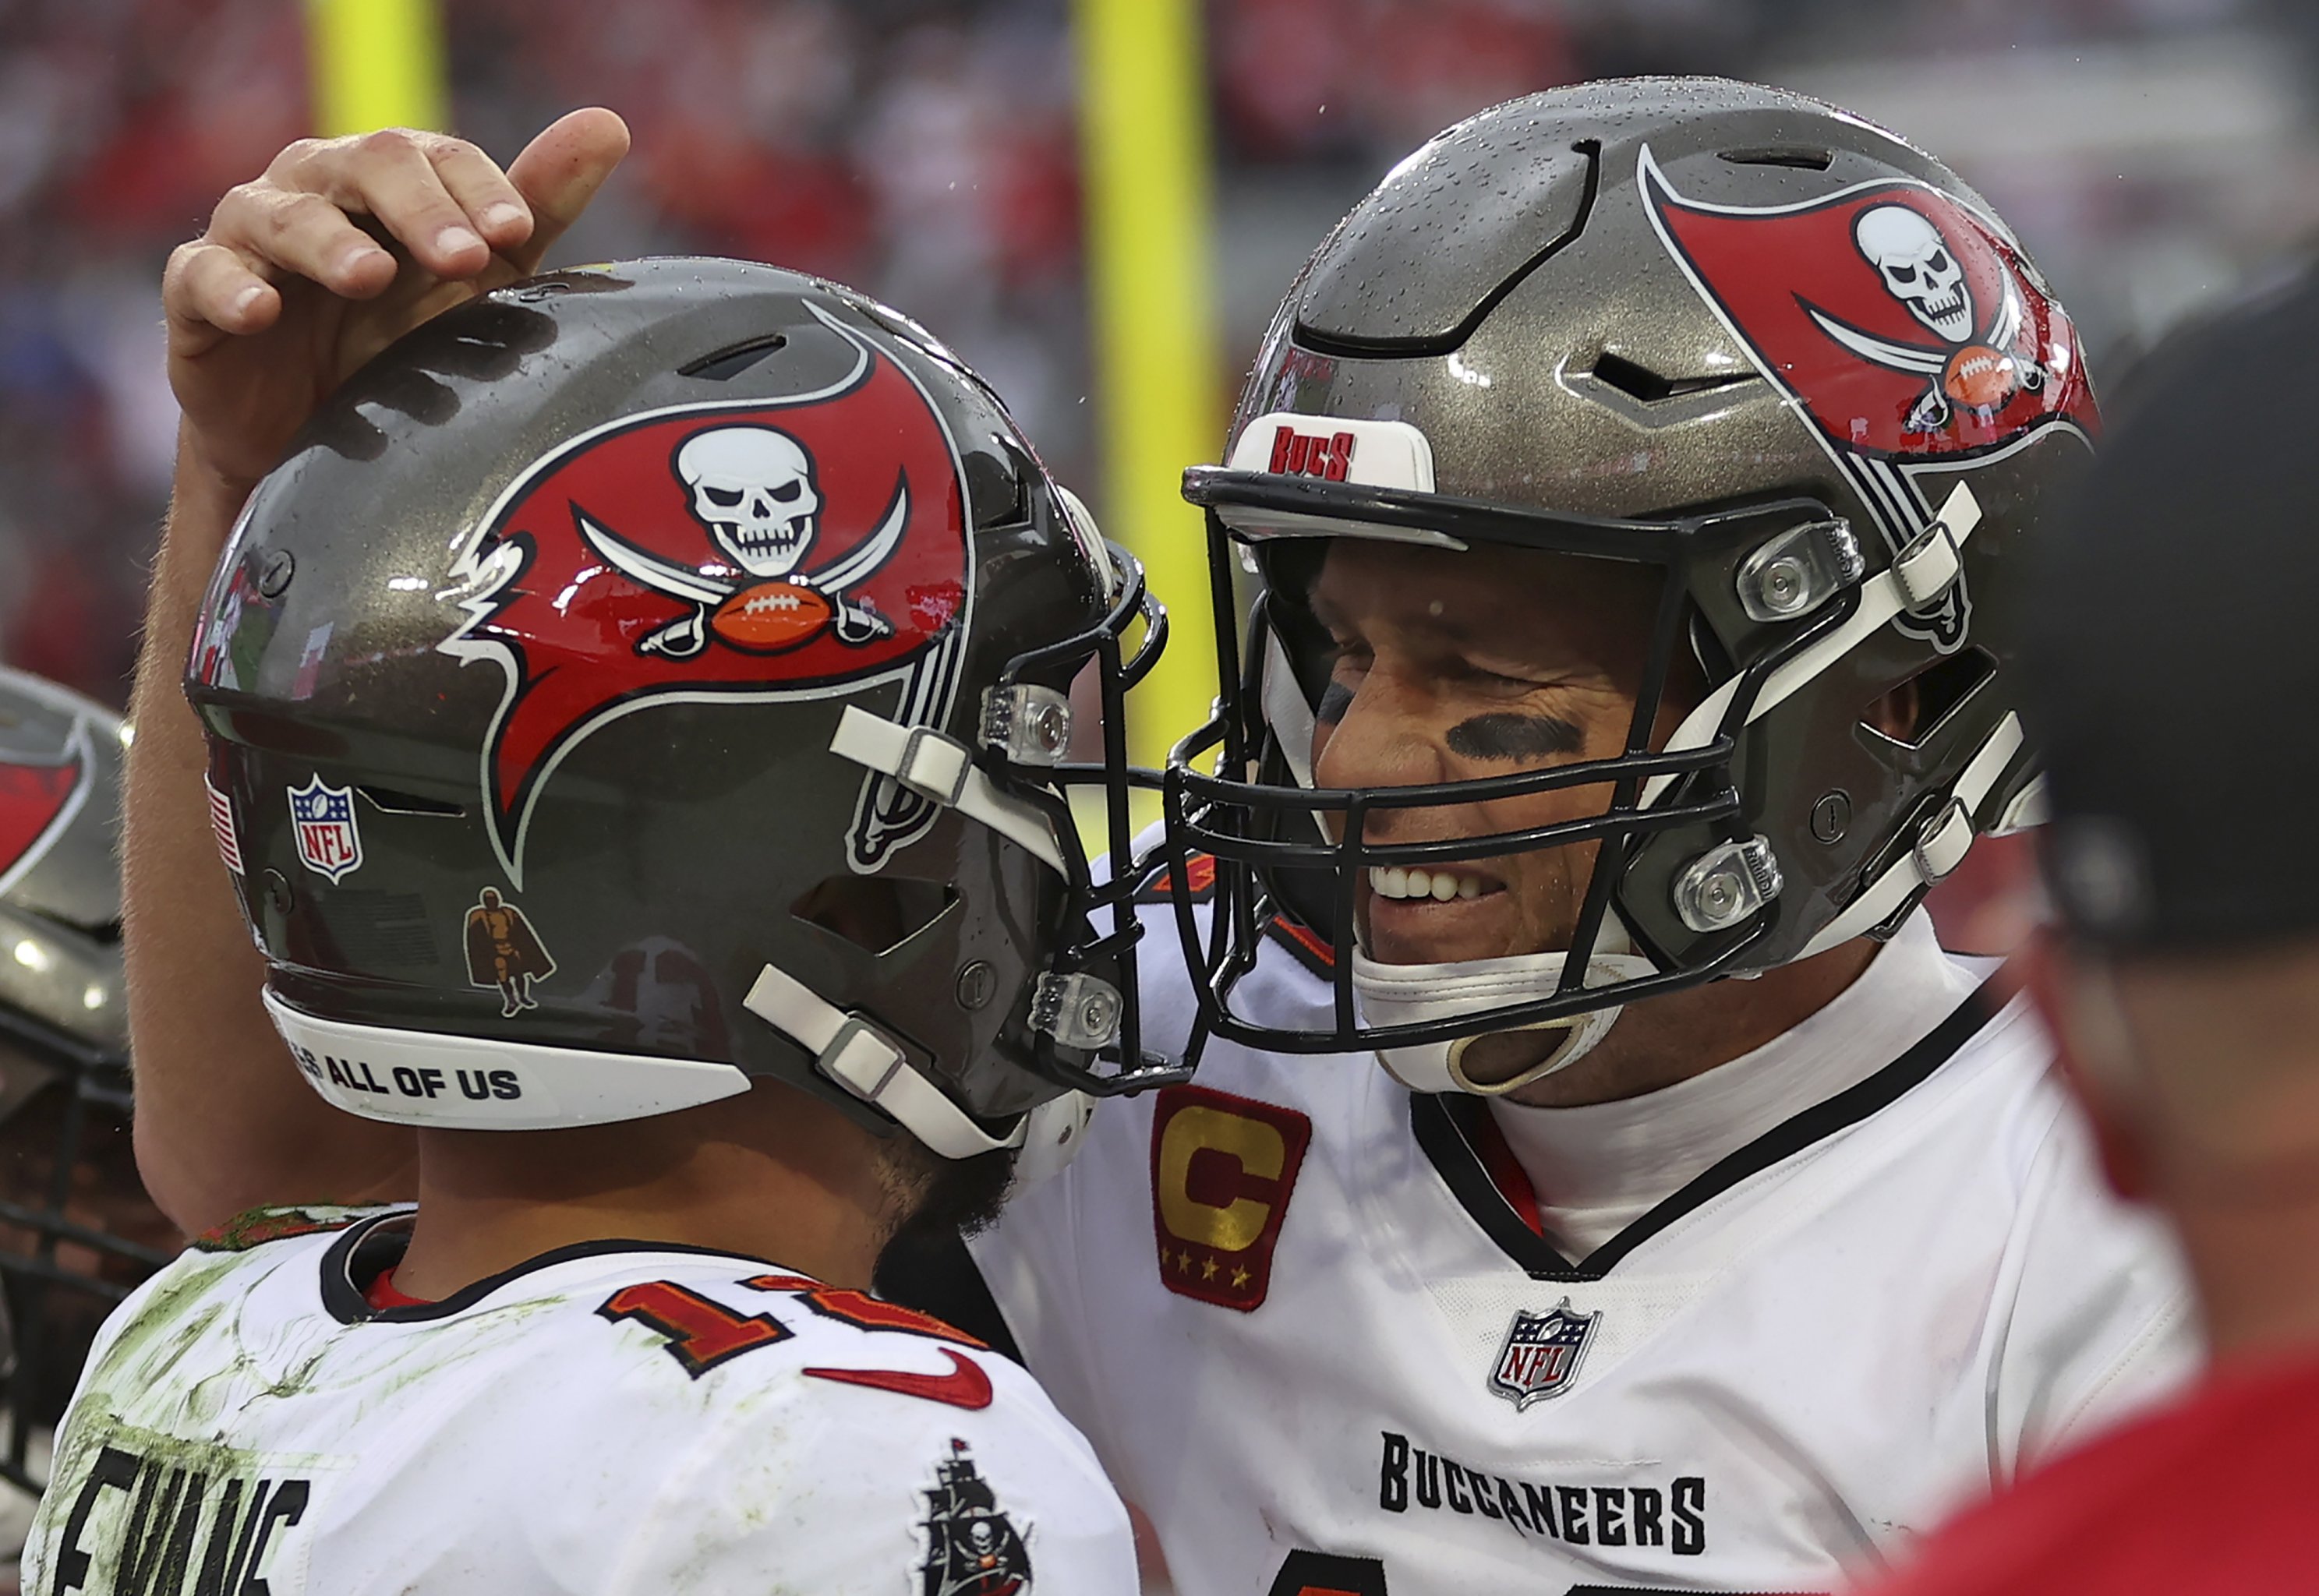 NFL: Bucs get embarrassed in 35-7 blowout loss to 49ers